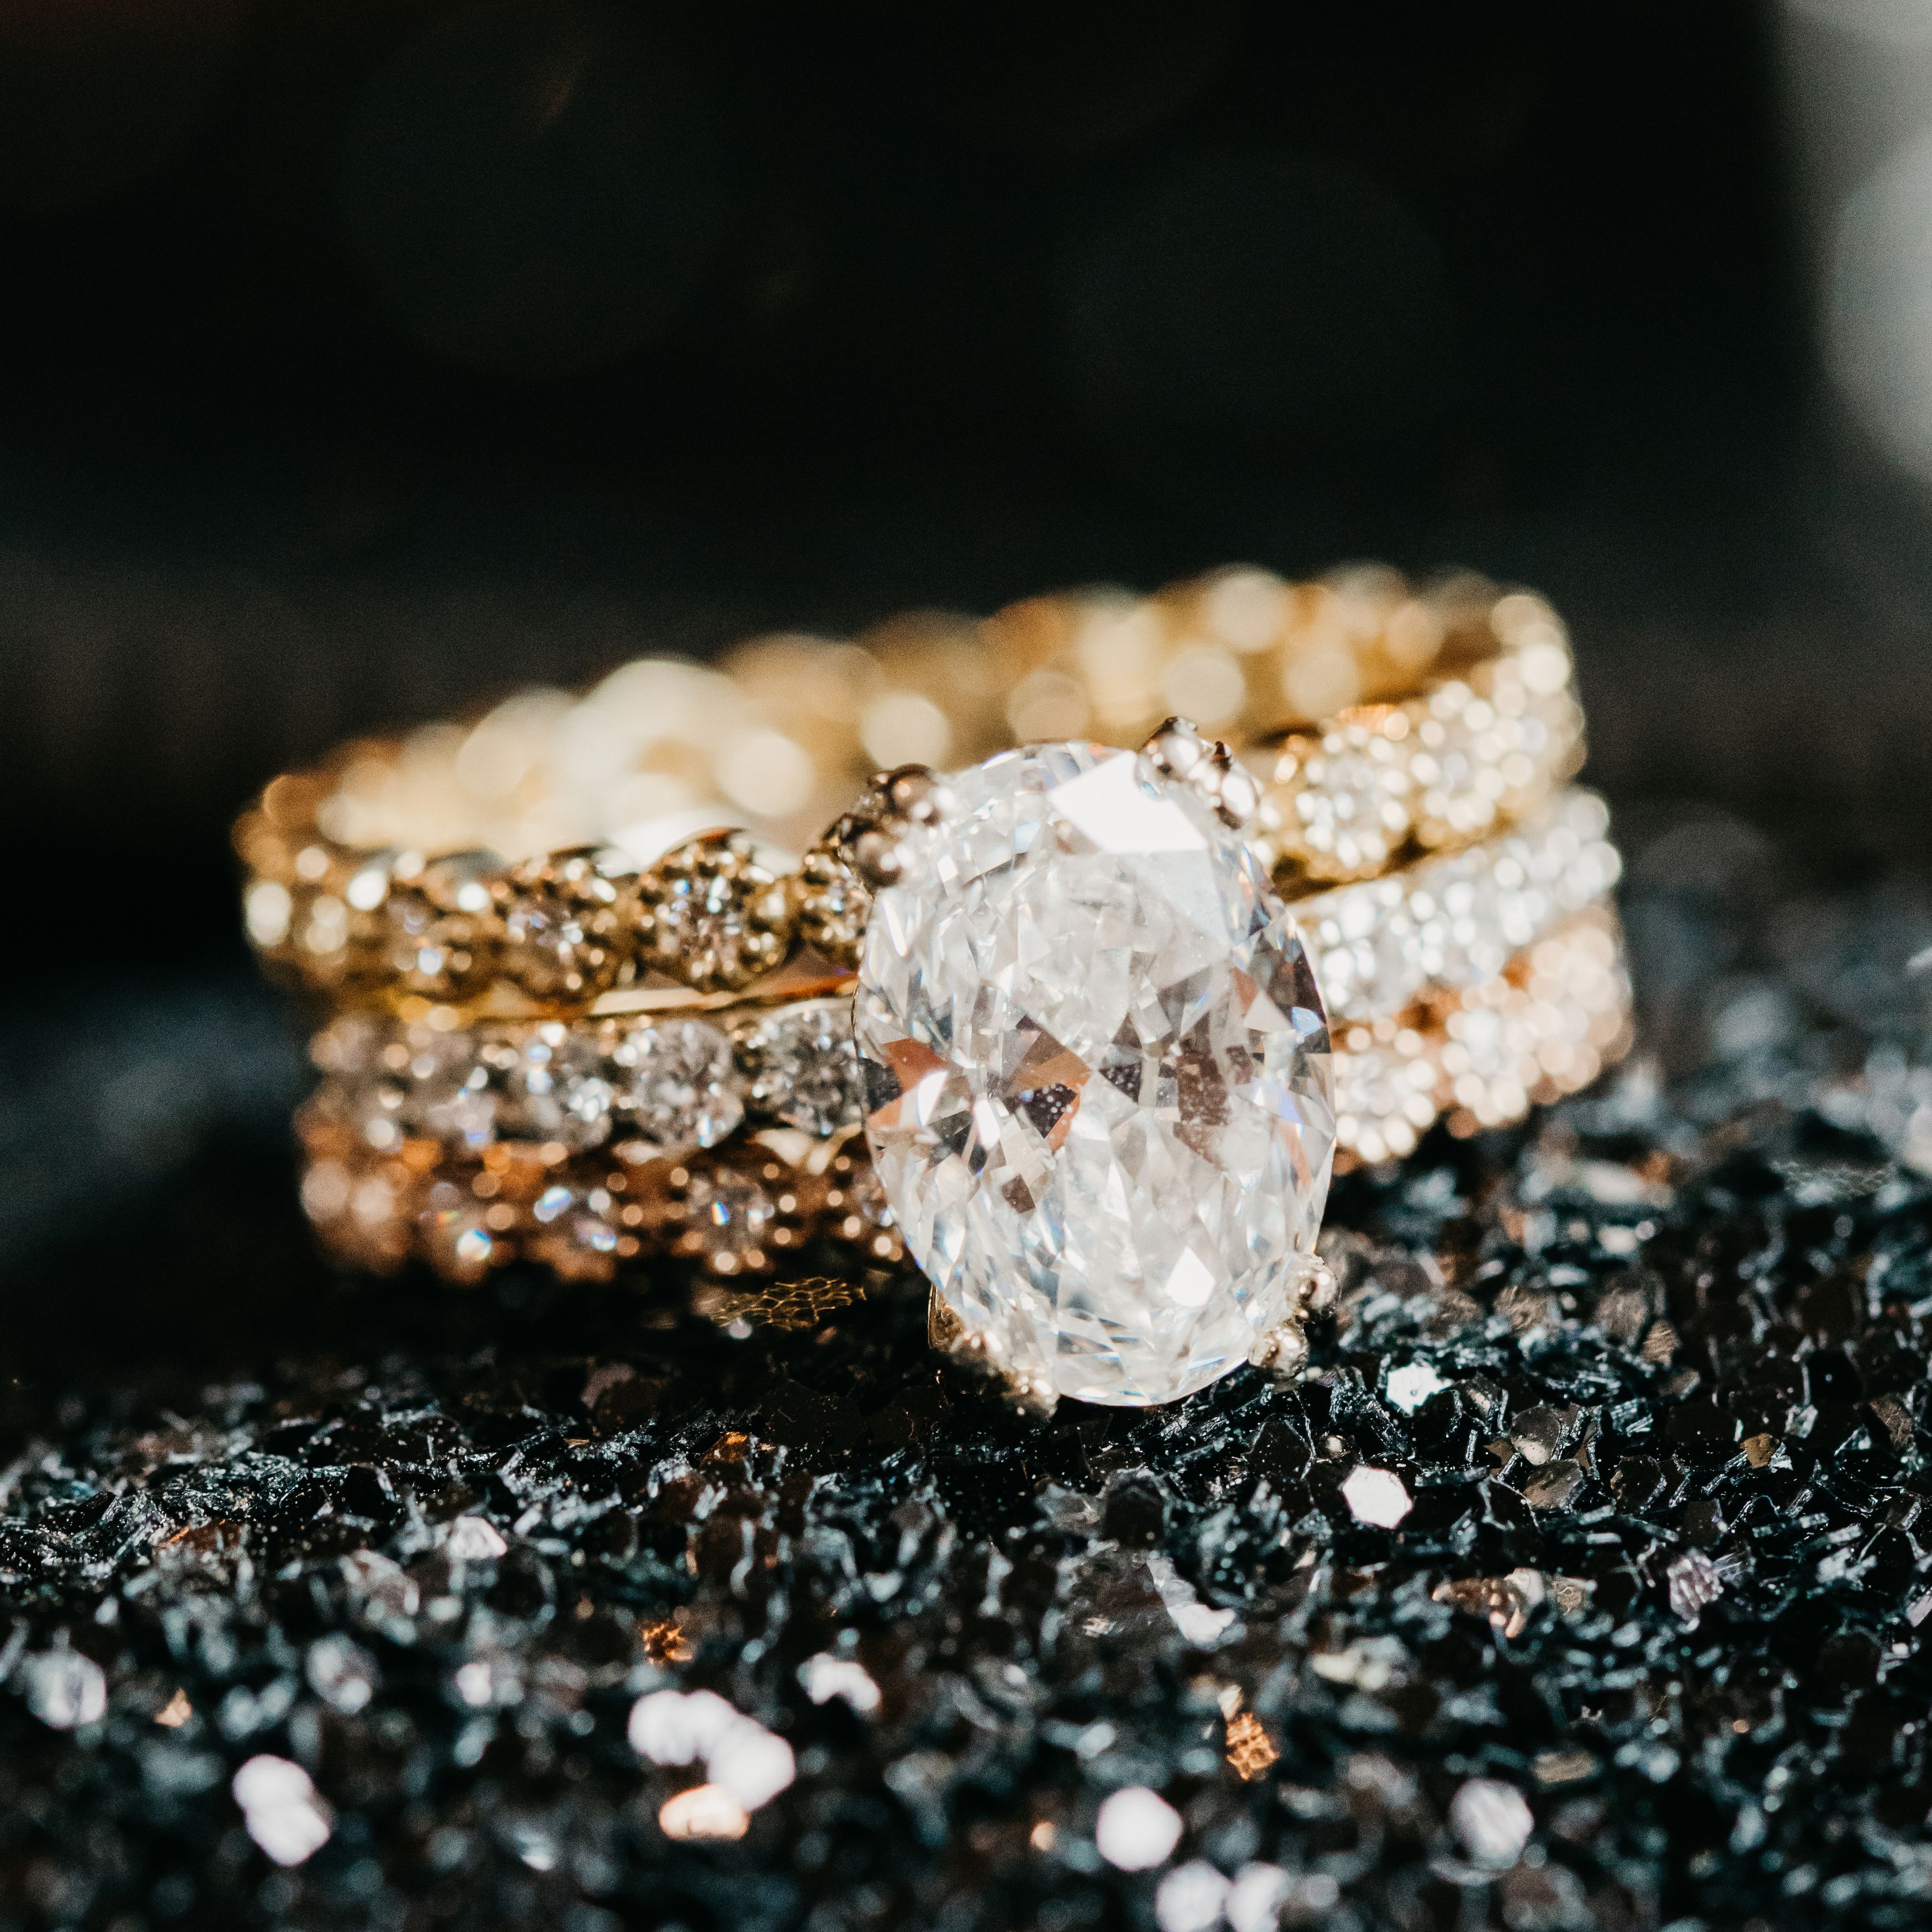 A few Things To Consider When Purchasing And Caring For Diamond Rings